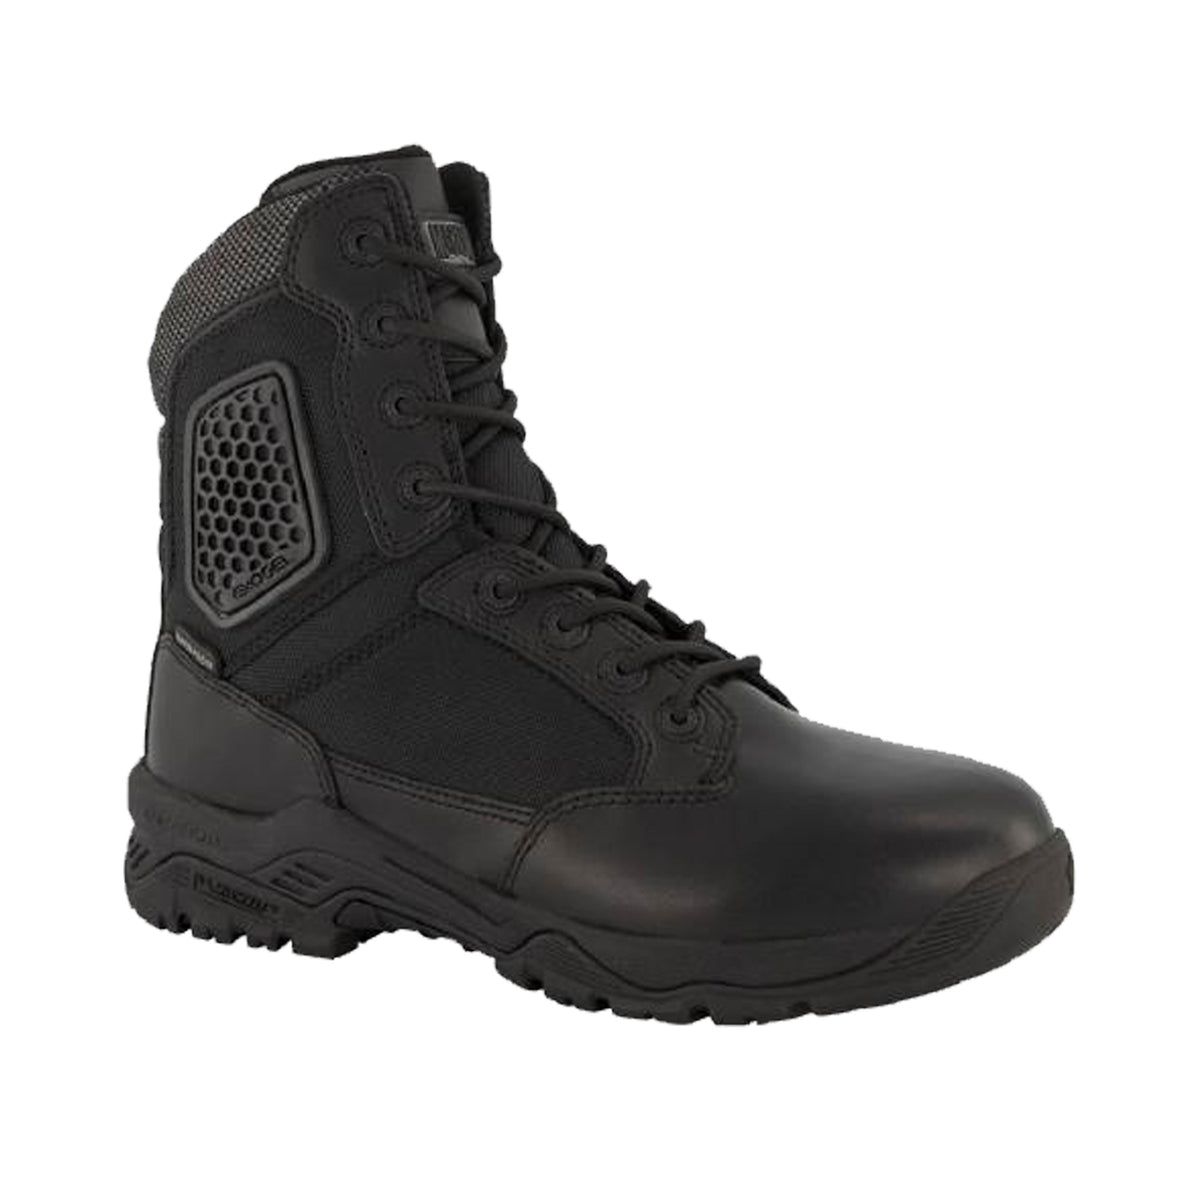 magnum boots strike force 8.0 side zip water proof